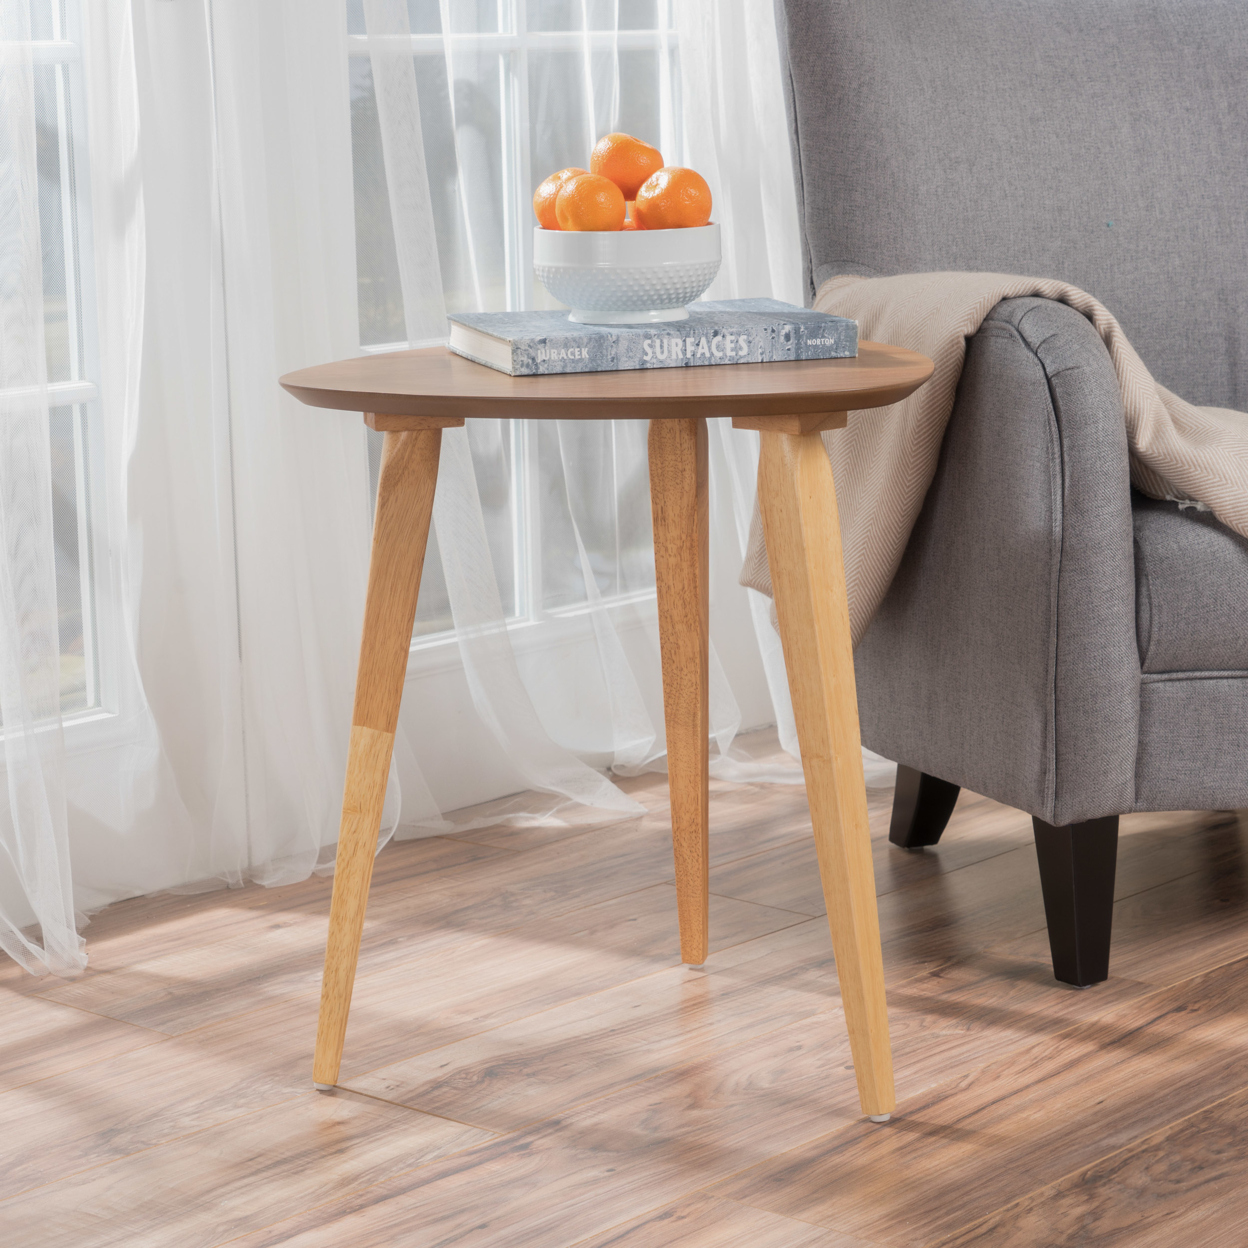 Finnian Modernistic Designed Wood Finish End Table - Natural